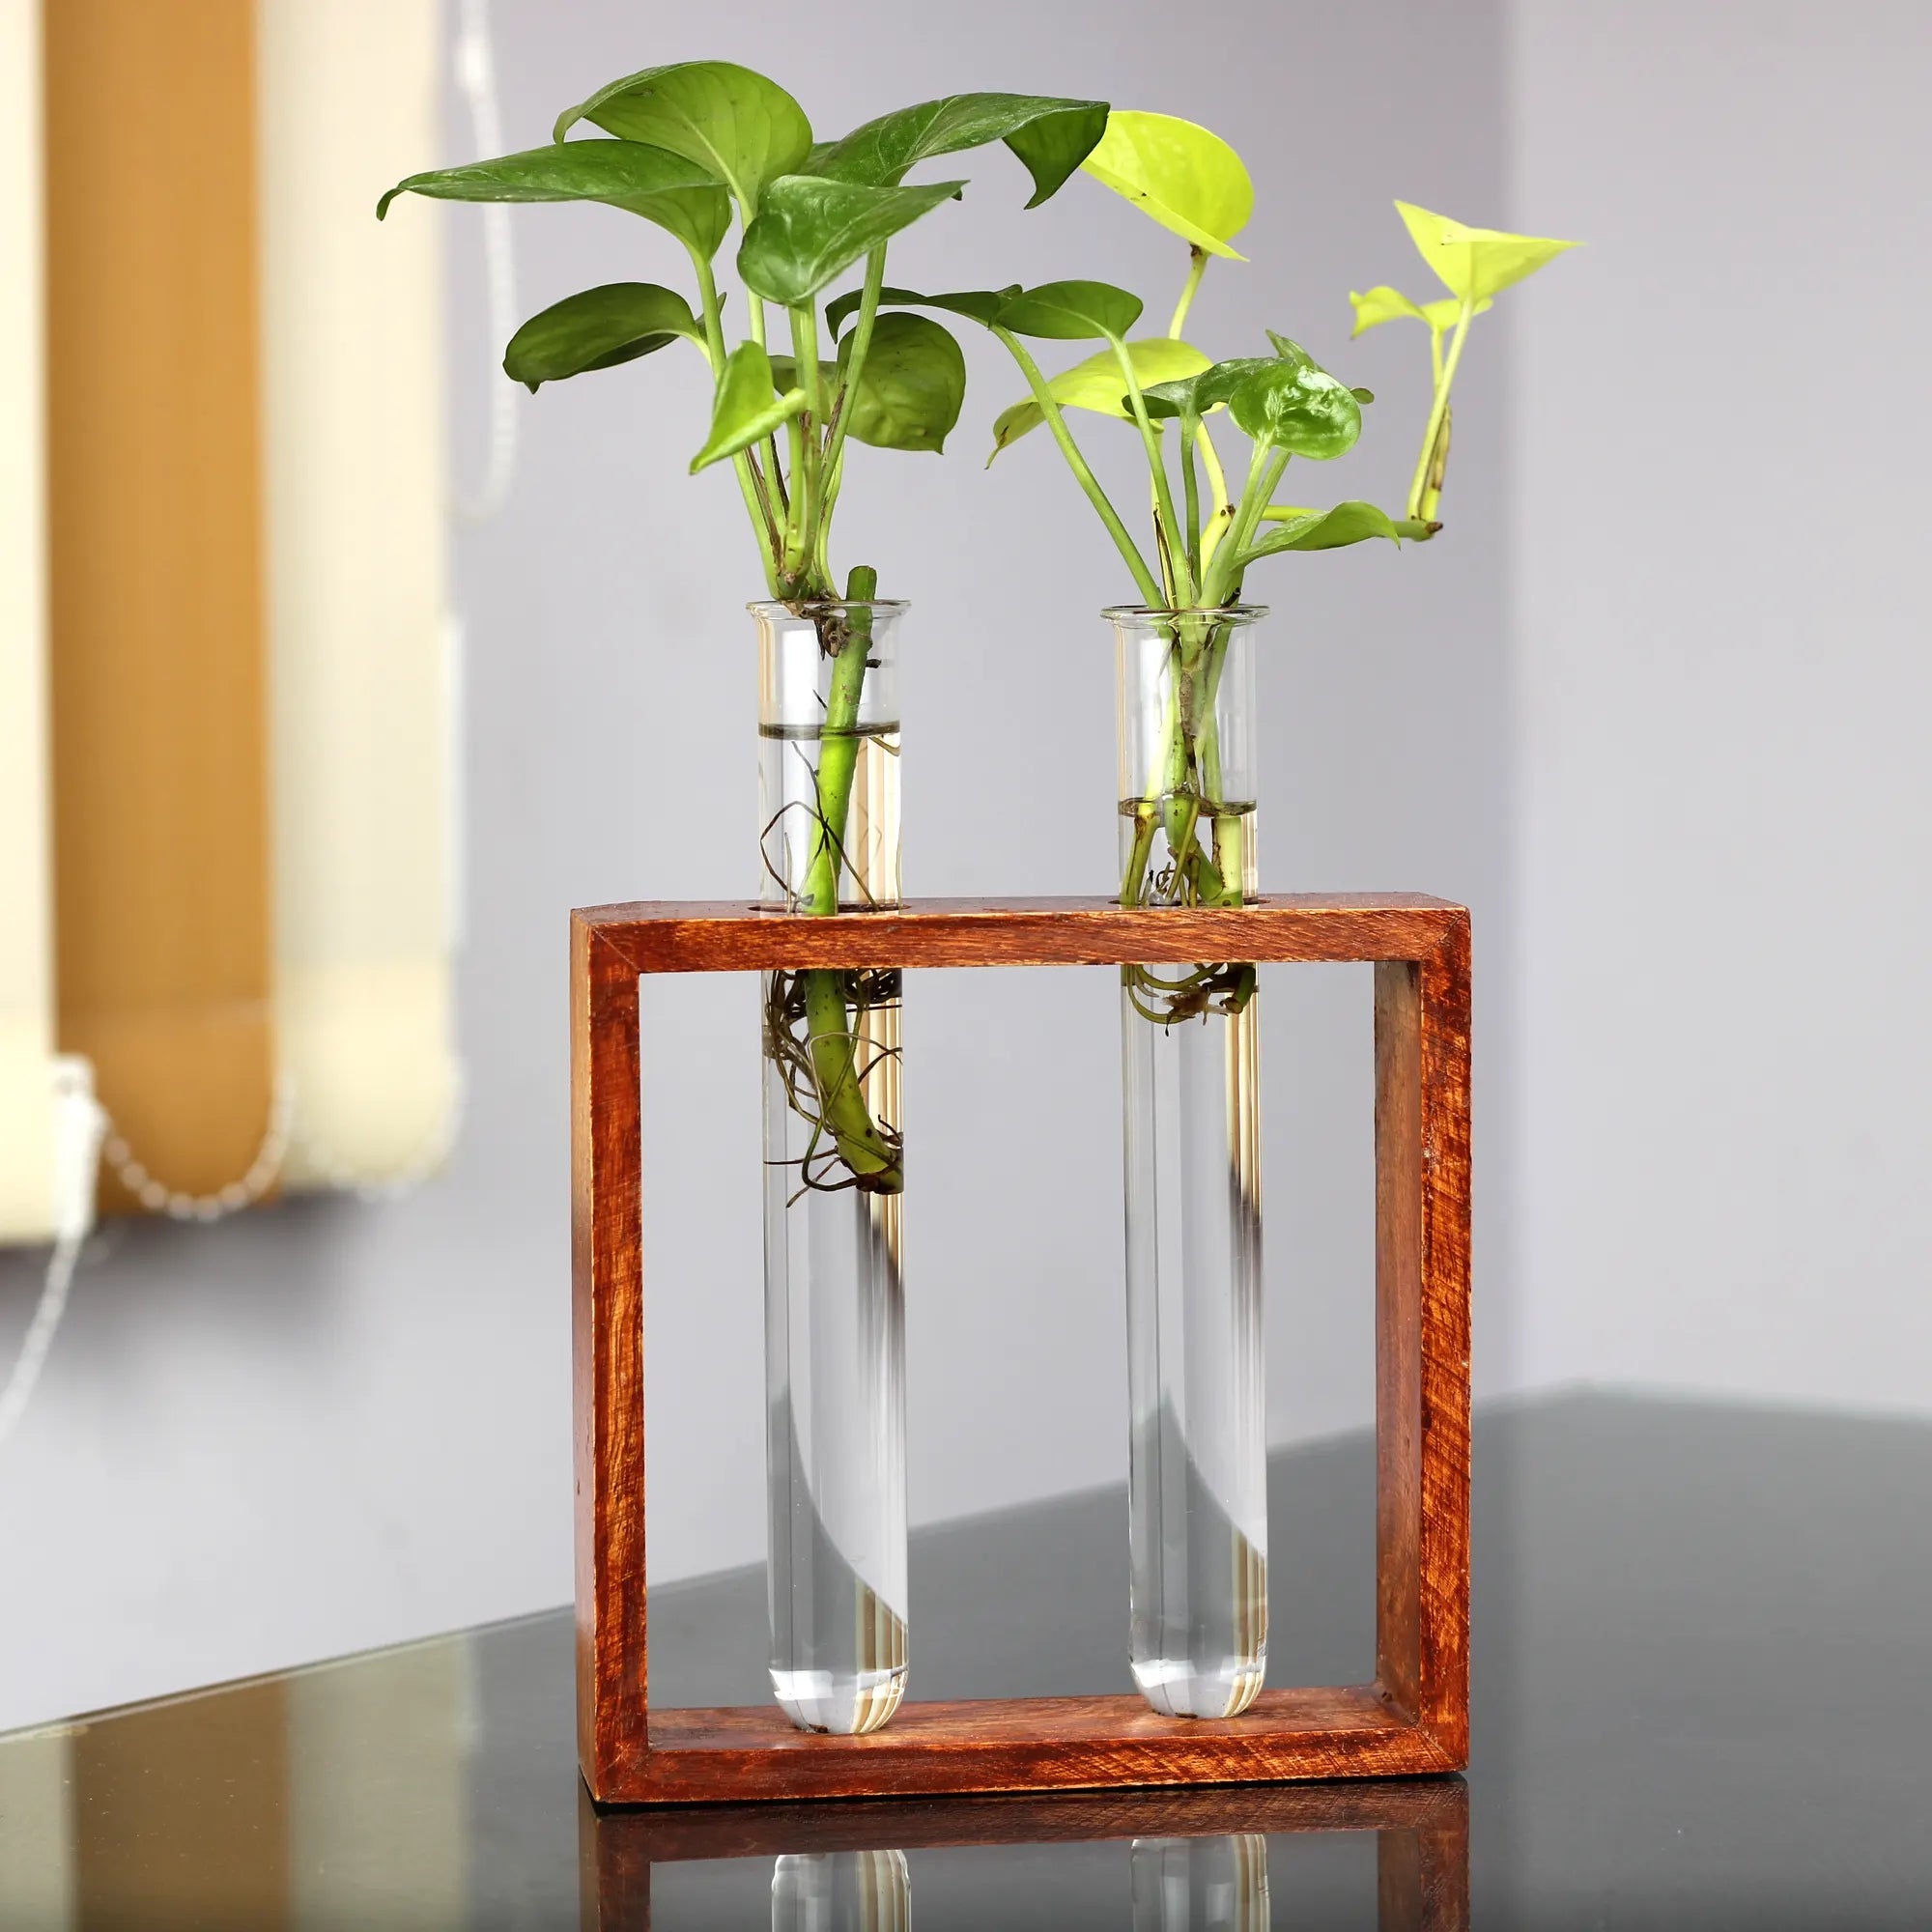 Modern Style Decorative Test Tube Planters with Wooden Frame Online (Set of 2) Indoor/Table Top Planter Urban Plant 